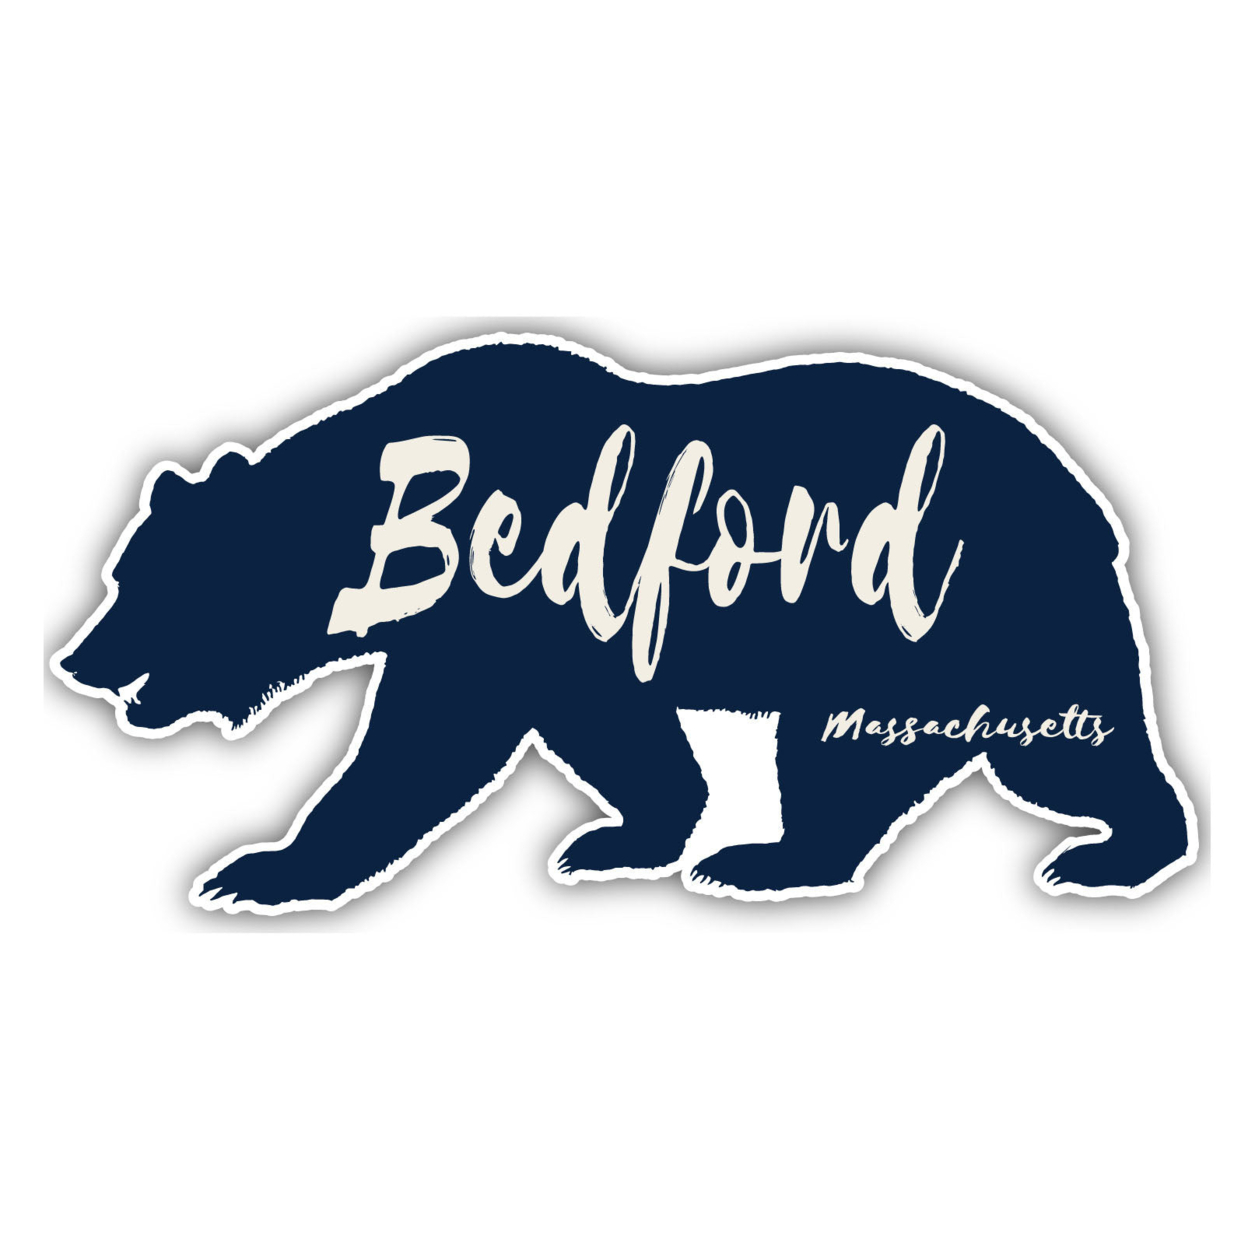 Bedford Massachusetts Souvenir Decorative Stickers (Choose Theme And Size) - 4-Pack, 6-Inch, Bear